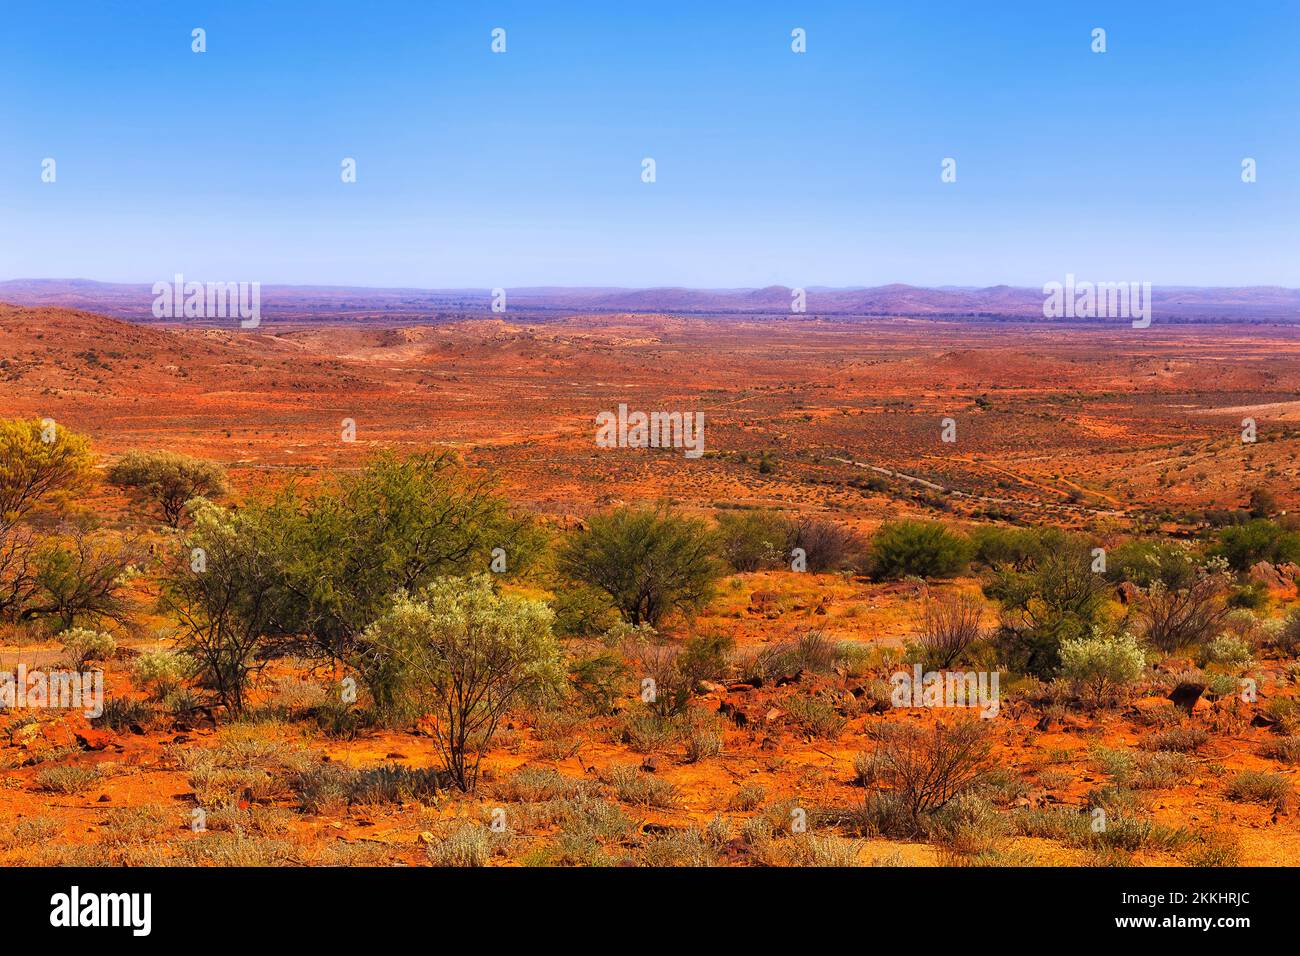 Scenic bright arid red soil landscape of Australian outback desert around Broken Hill city in NSW on a hot summer day. Stock Photo